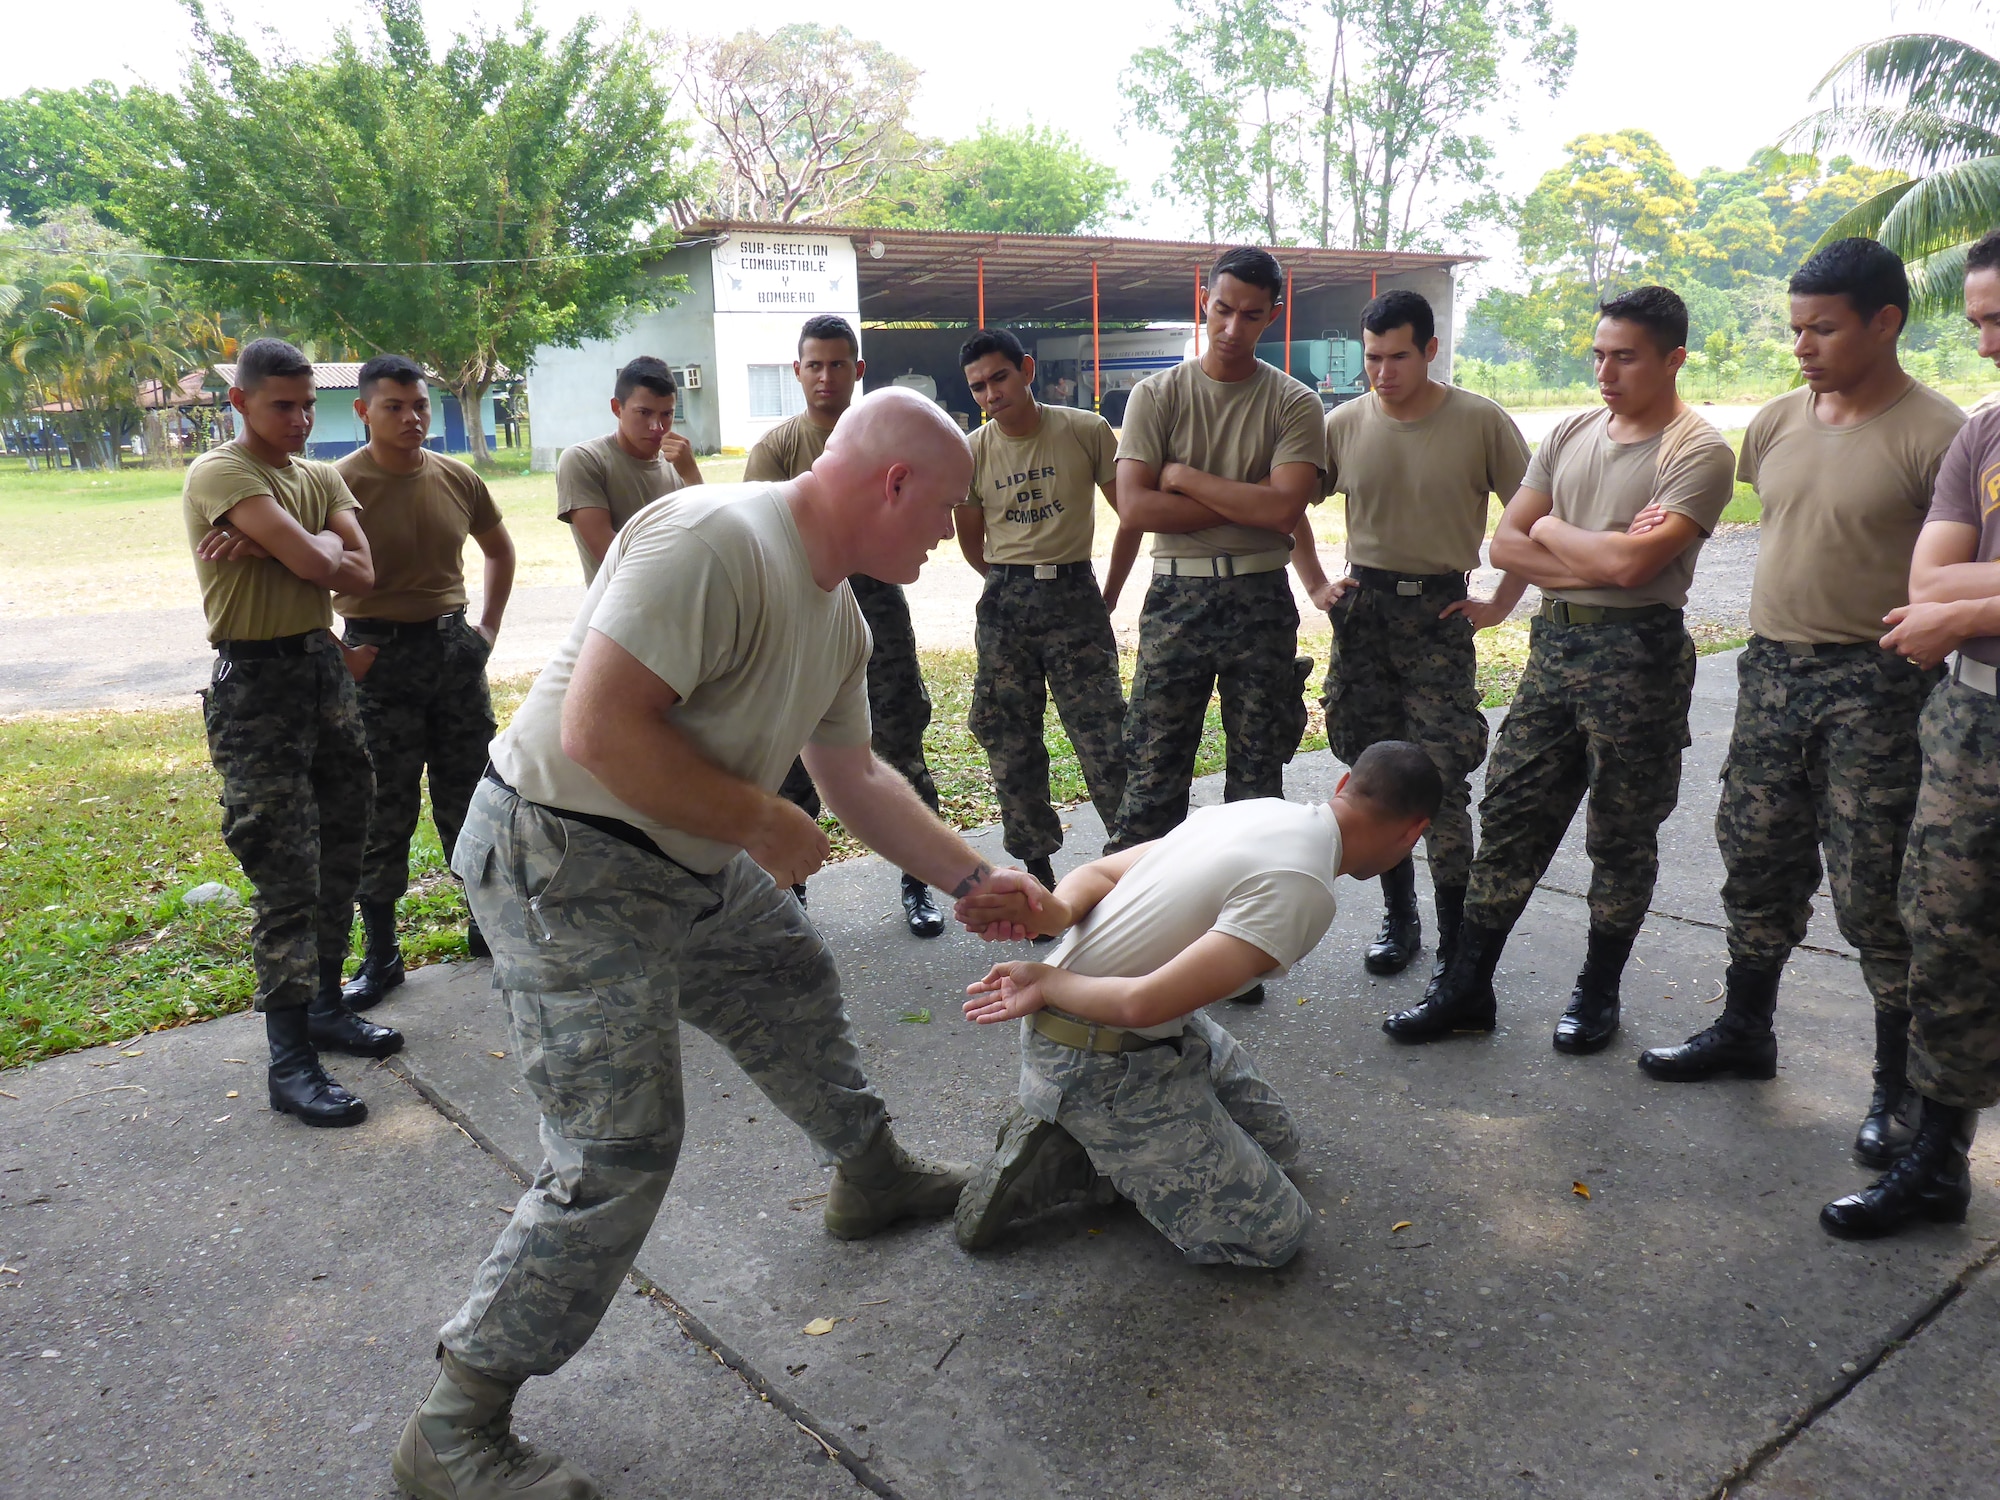 Master Sgt. Marc Slonecker and Tech. Sgt. Edgar Gonzalez, 571st Mobility Support Advisory Squadron security forces air advisers, demostrate restraint techniques earlier this year for members of the Honduran air force security team during an MSAS Building Partnership Capacity mission at Hector Caraccioli Moncada Air Base, Honduras. (U.S. Air Force photo/Capt. Elizabeth Peters)